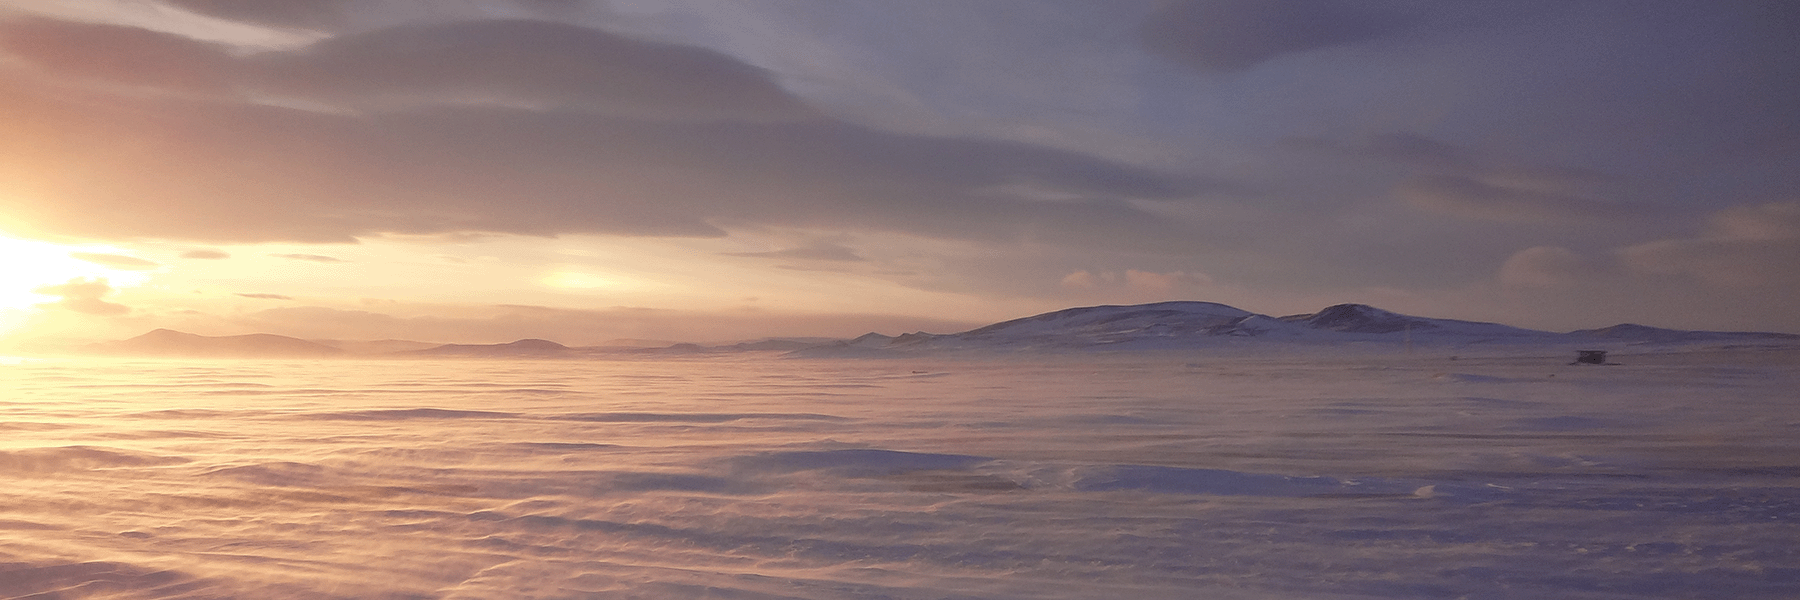 View of the Arctic landscape from the Tiksi, Russia observatory.